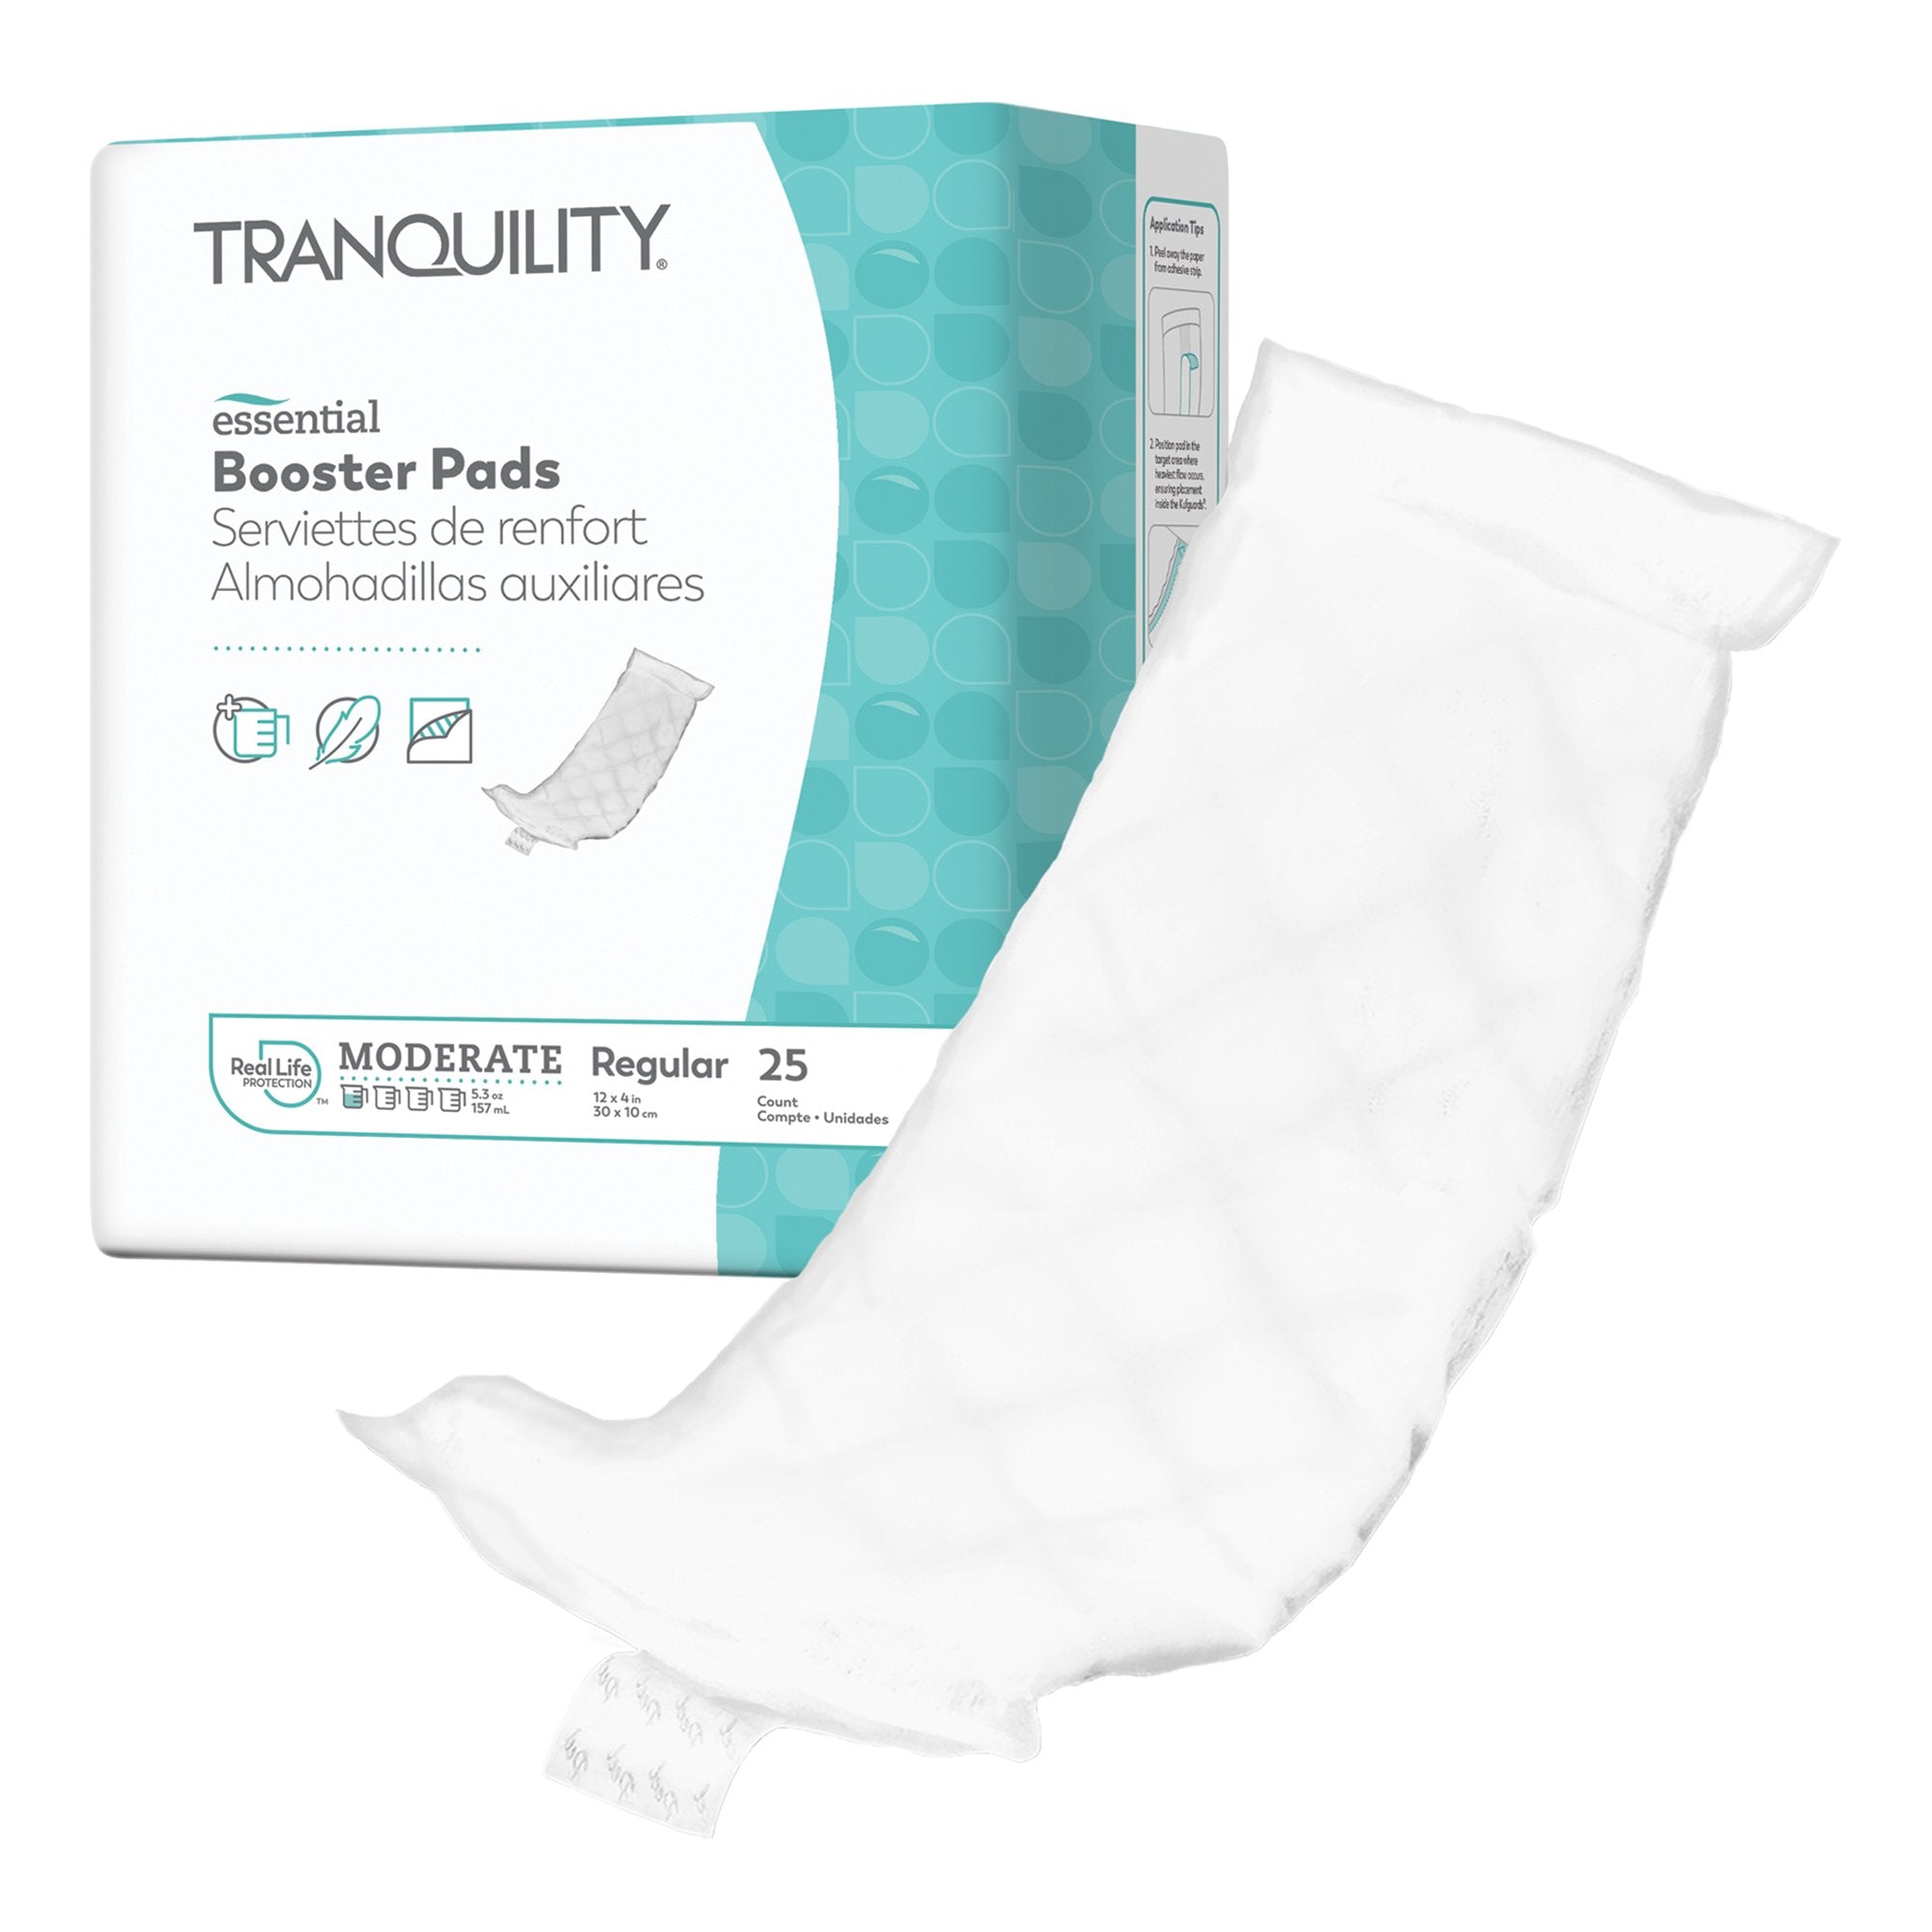 Booster Pad Tranquility® Essential 4 X 12 Inch Moderate Absorbency Superabsorbant Core Regular